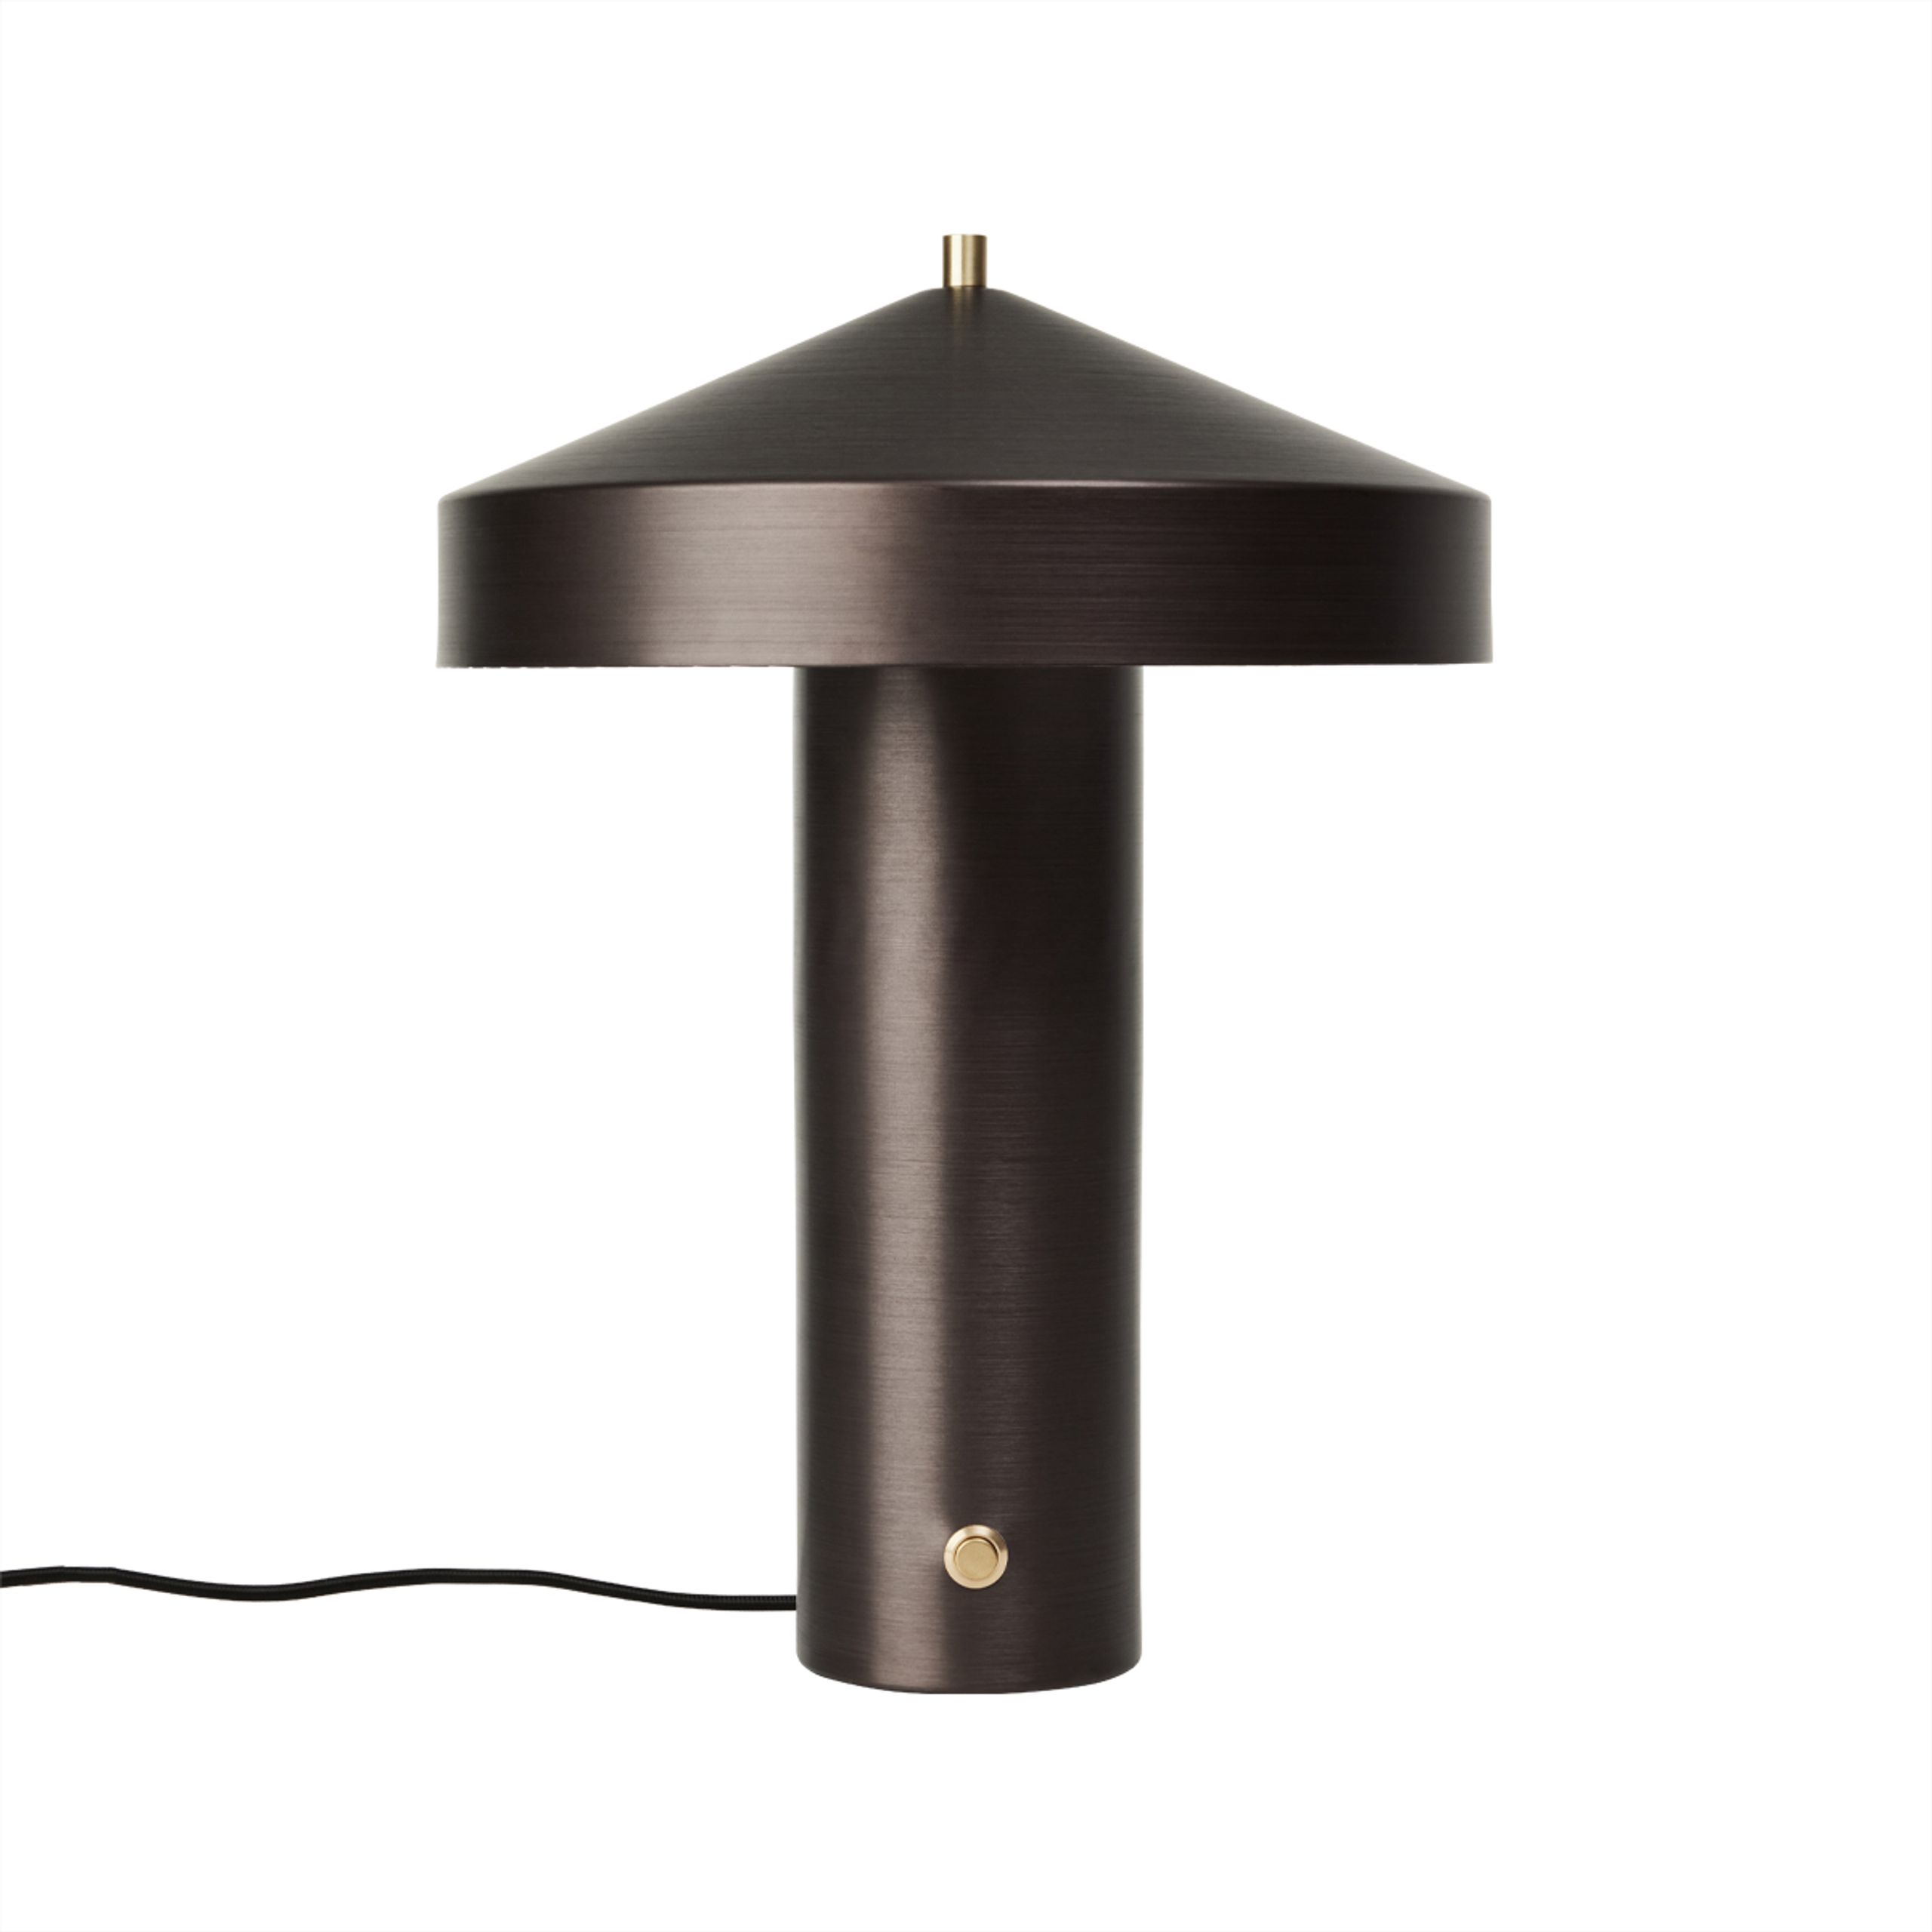 OYOY LIVING - Table Lamp - Hatto Table Lamp  - 301 Browned Brass